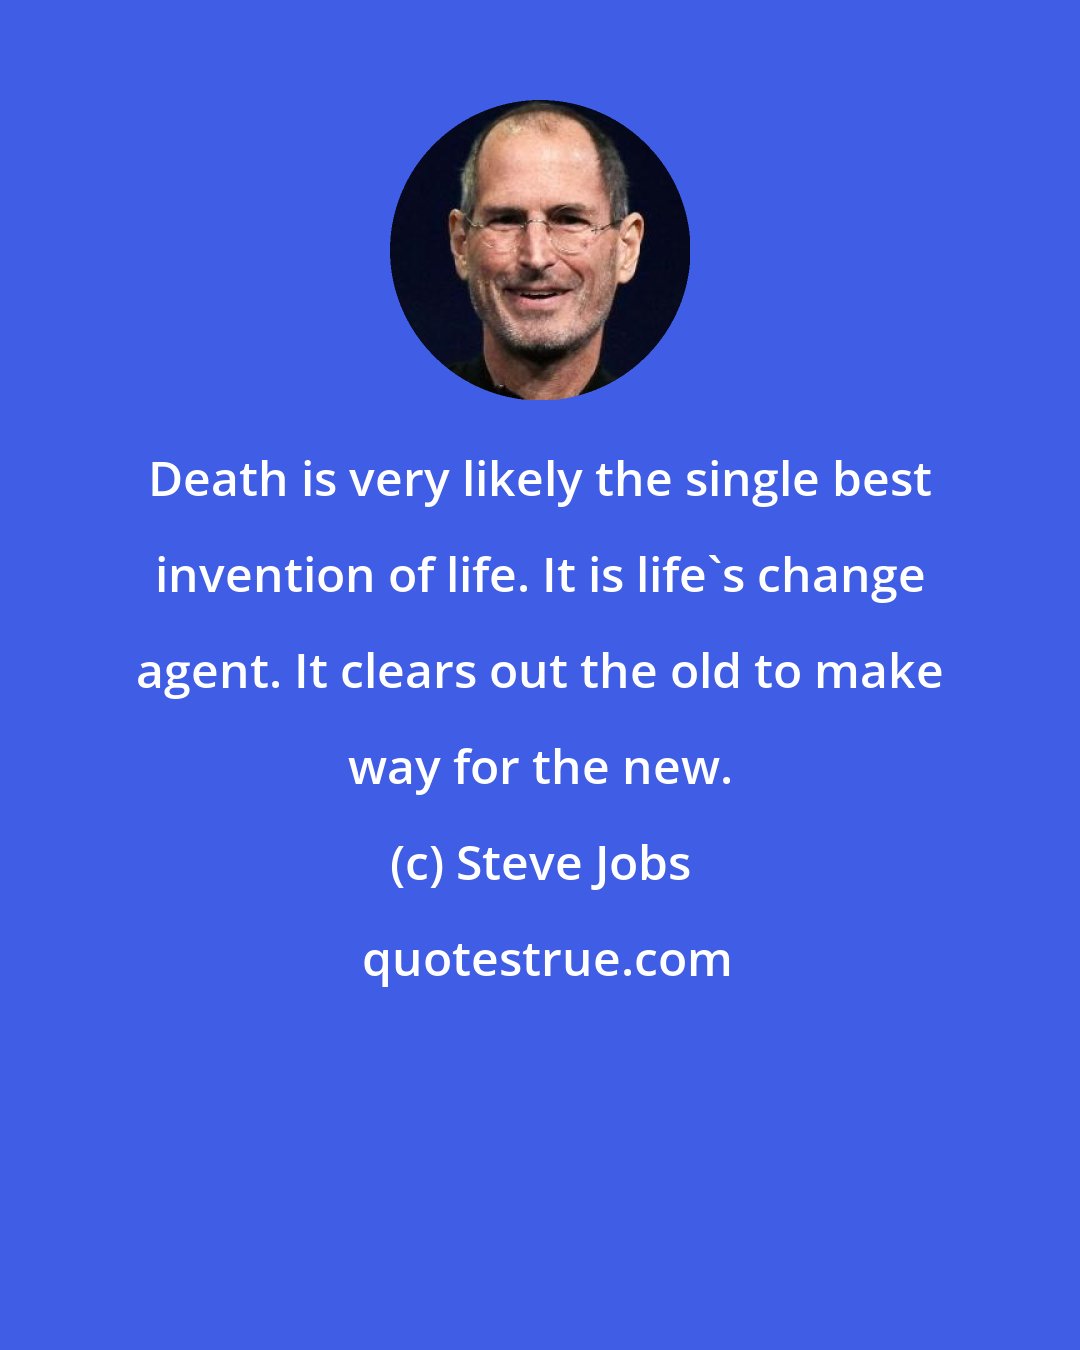 Steve Jobs: Death is very likely the single best invention of life. It is life's change agent. It clears out the old to make way for the new.